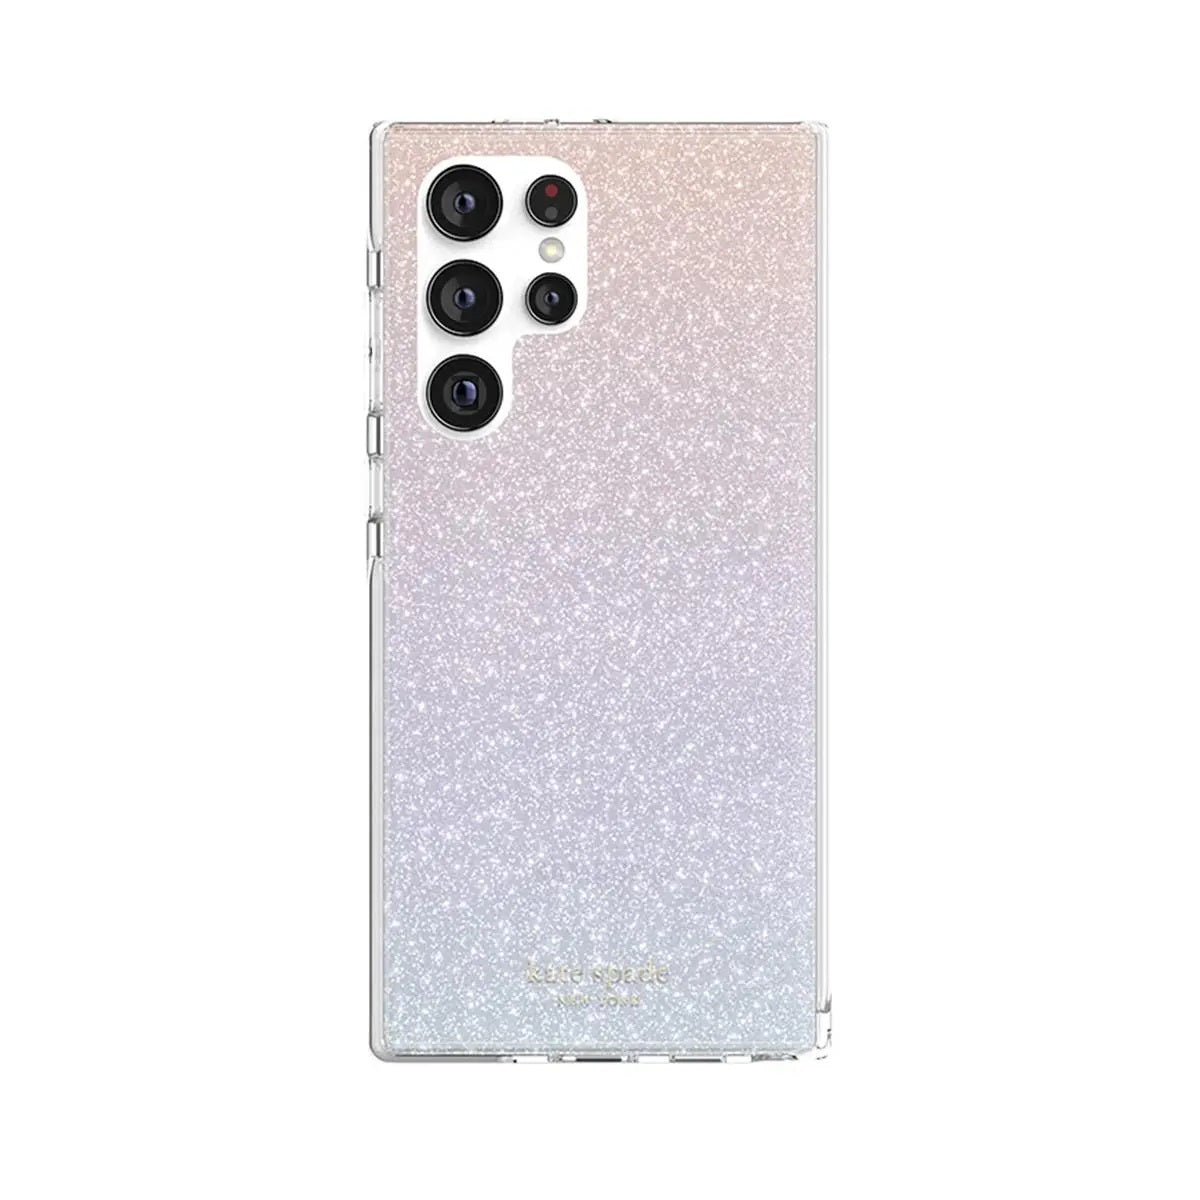 Kate Spade New York Defensive Hardshell Case for Samsung Galaxy S22 Series (Ombre Glitter)